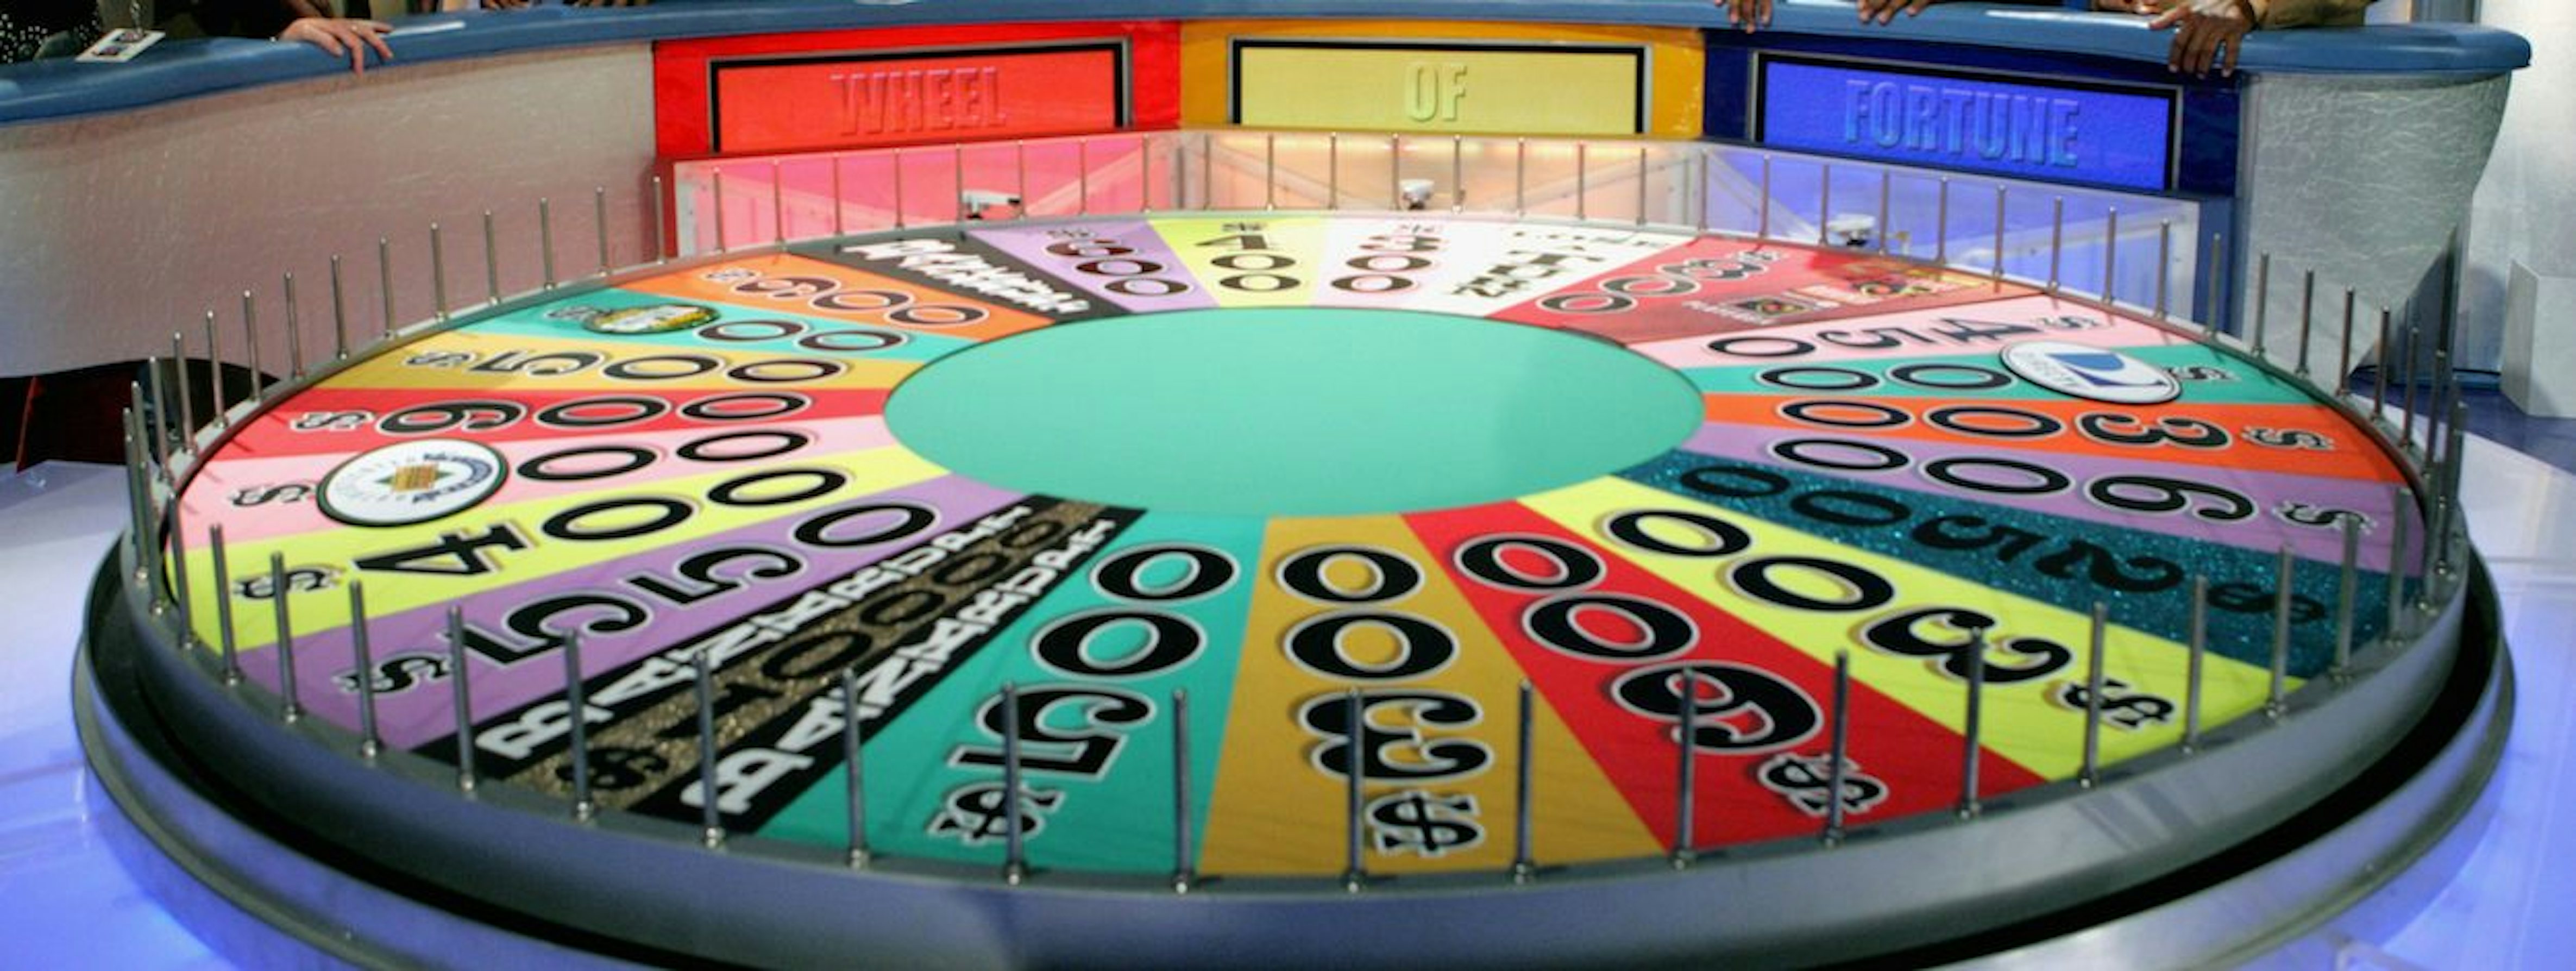 wheel-of-fortune-strategy-how-to-win-the-gameshow-the-new-republic